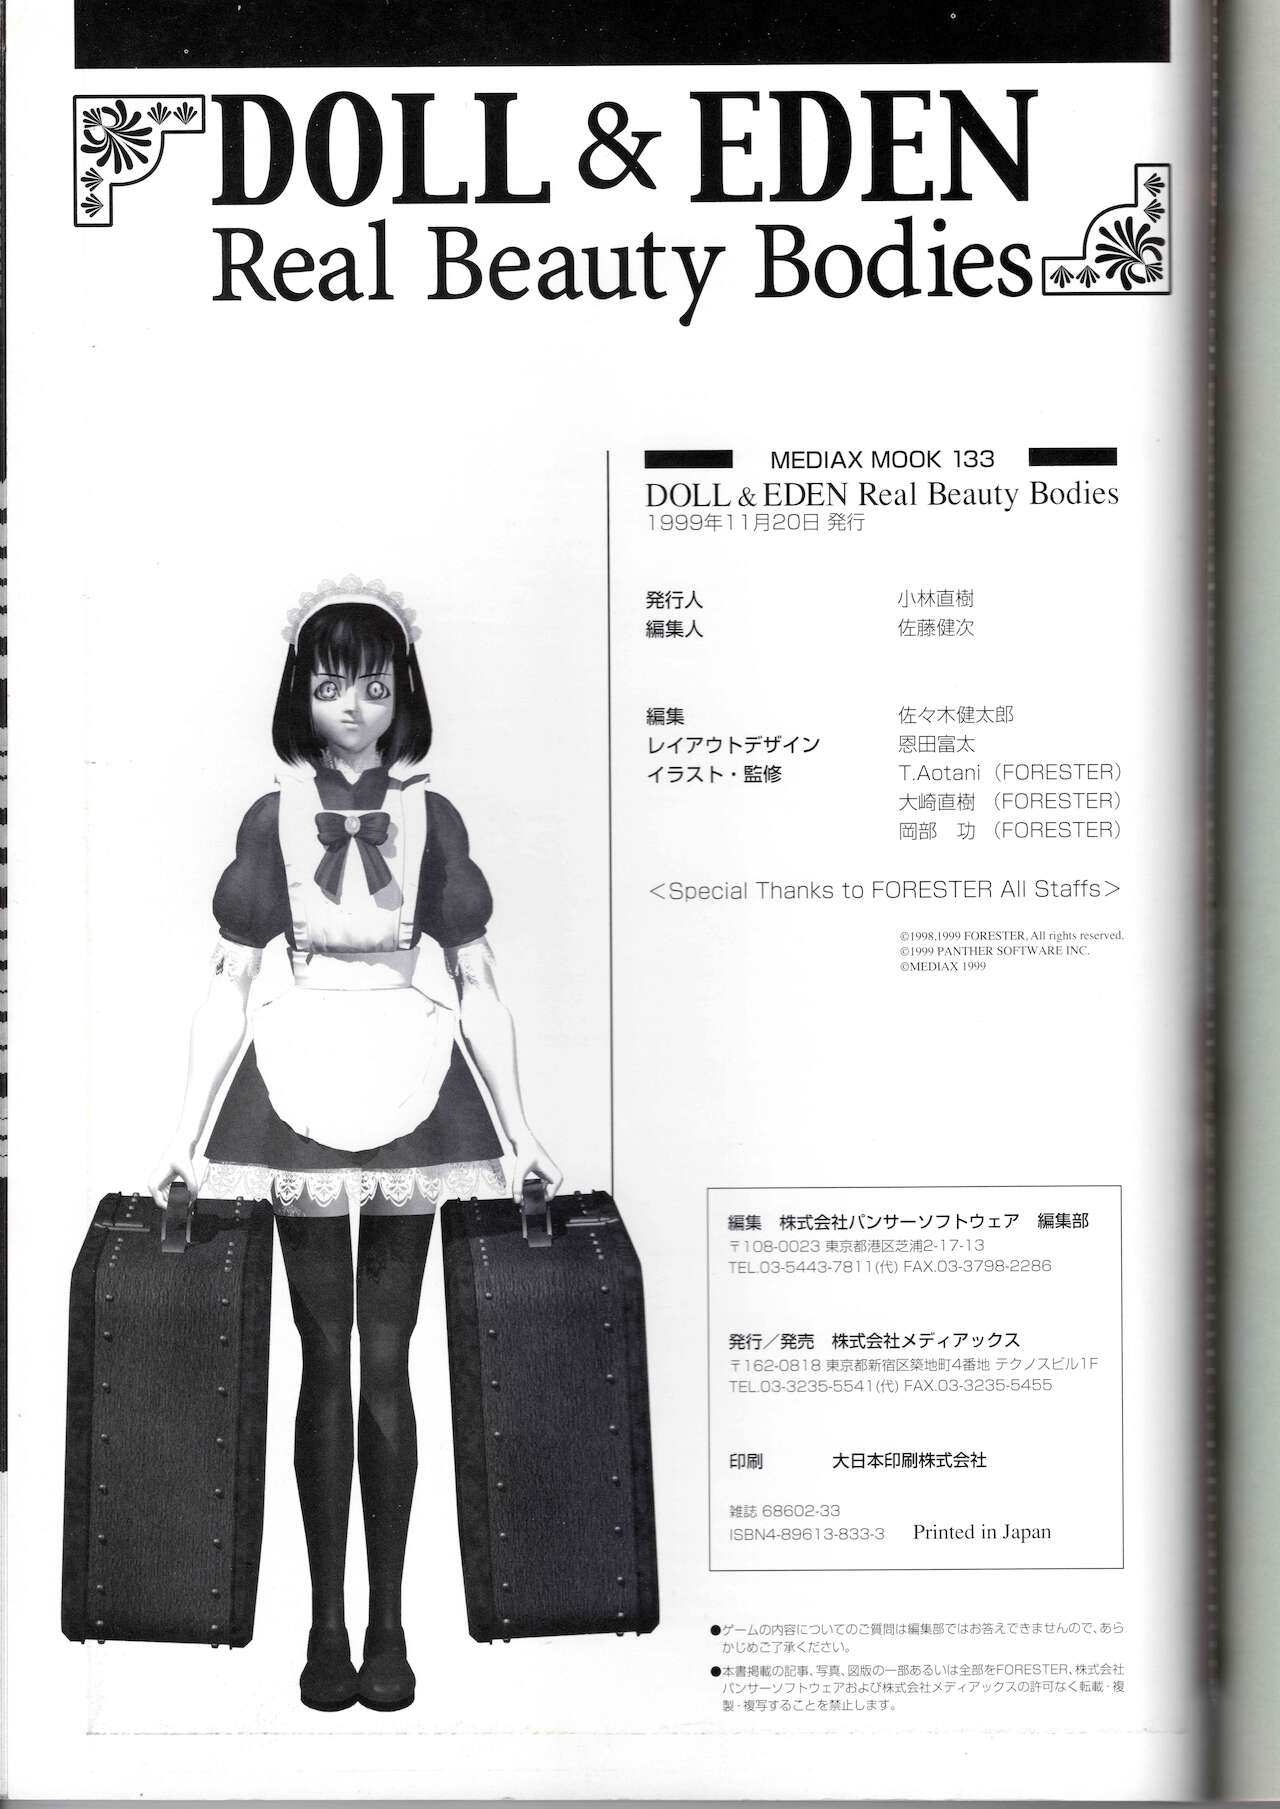 [Forester] DOLL&EDEN Real Beauty Bodies MEDIAX (1999) 98